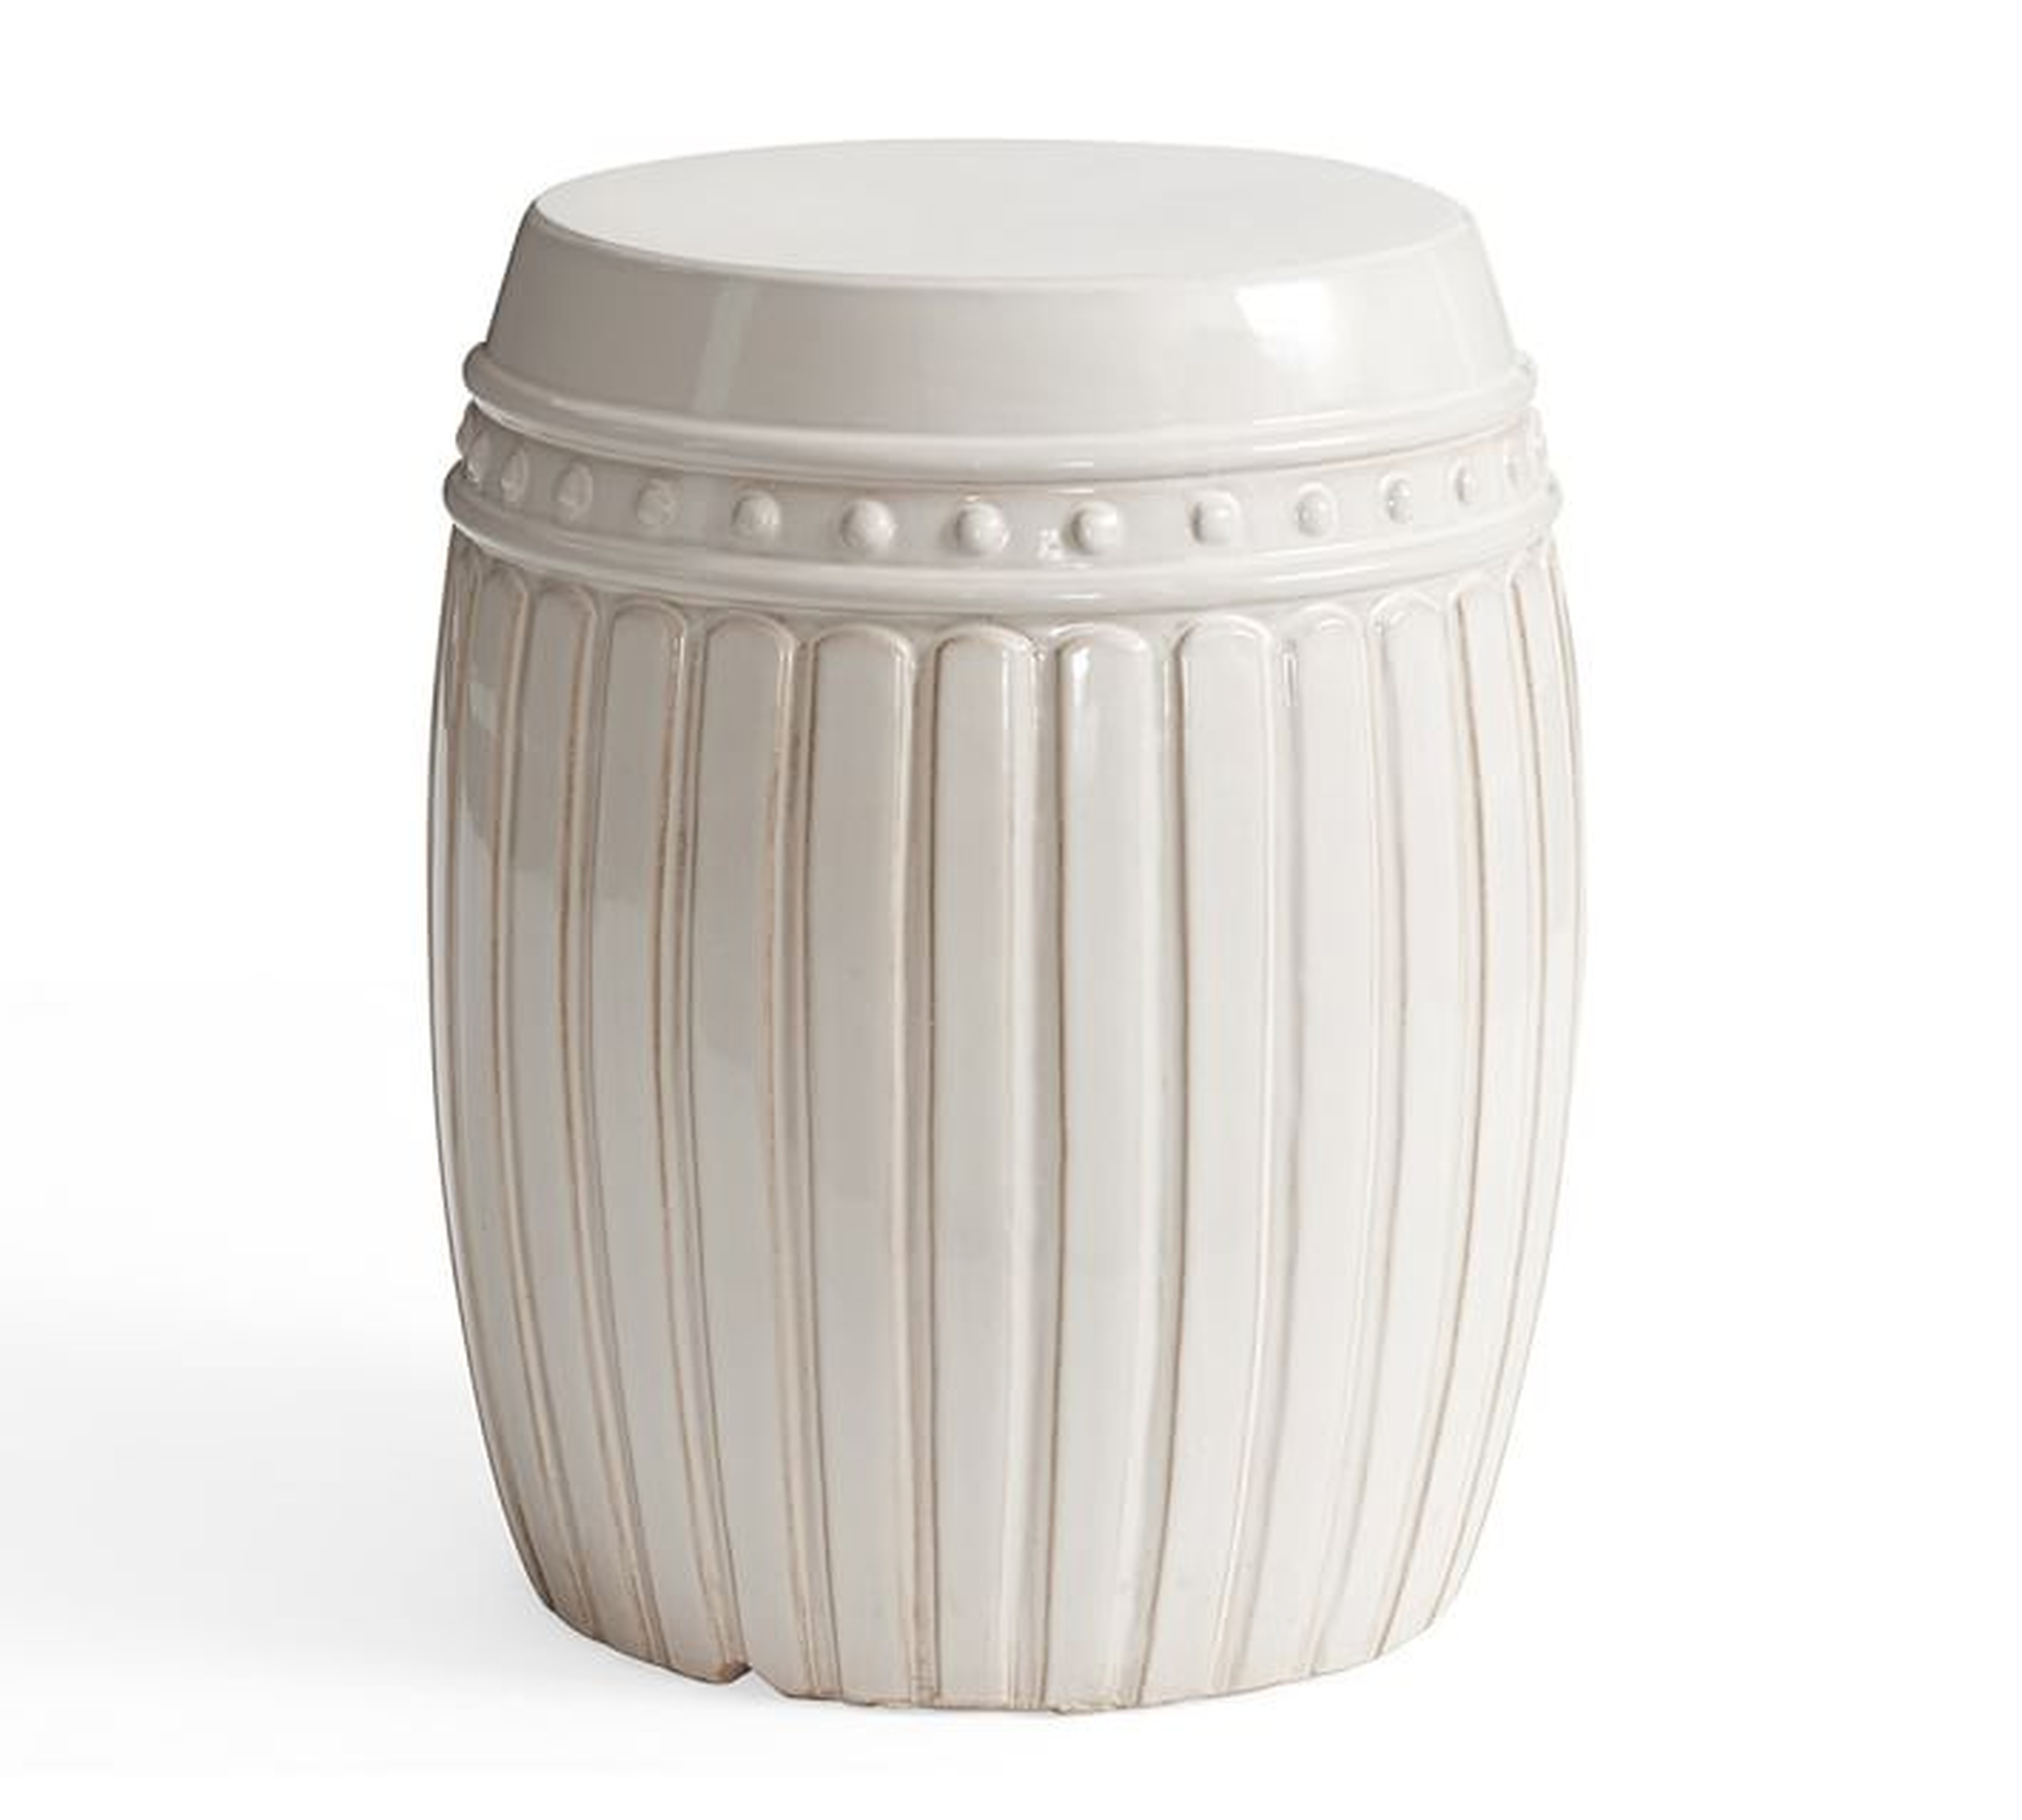 Reeded Ceramic Accent Table, White - Pottery Barn